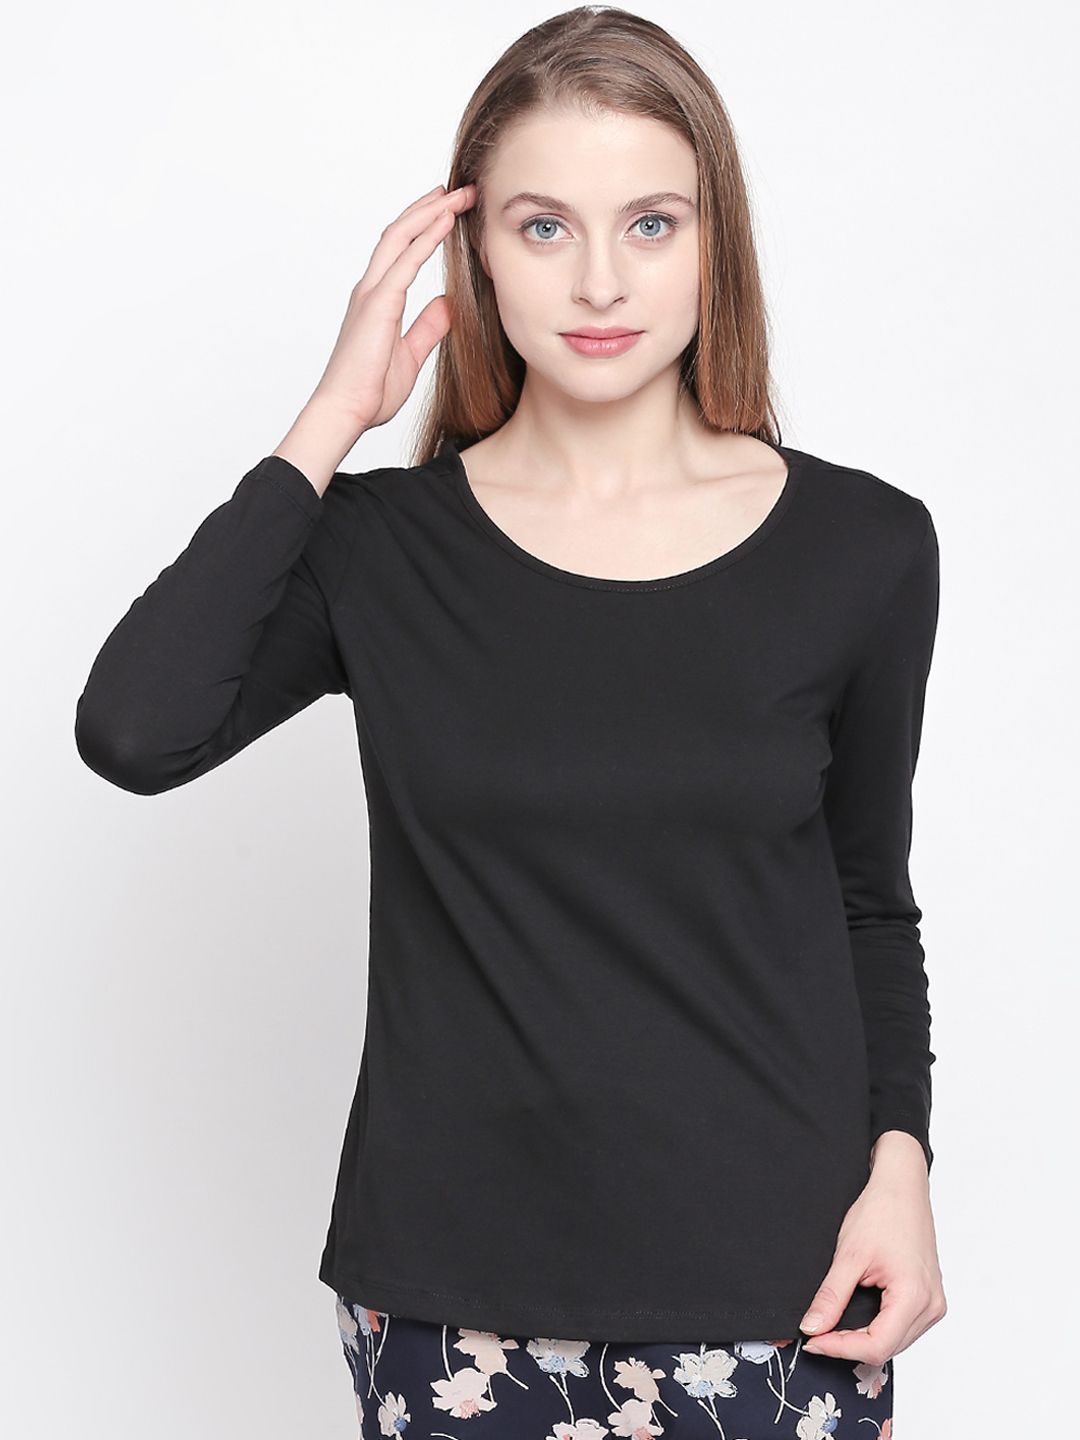 Dreamz by Pantaloons Women Black Solid Lounge tshirt Price in India